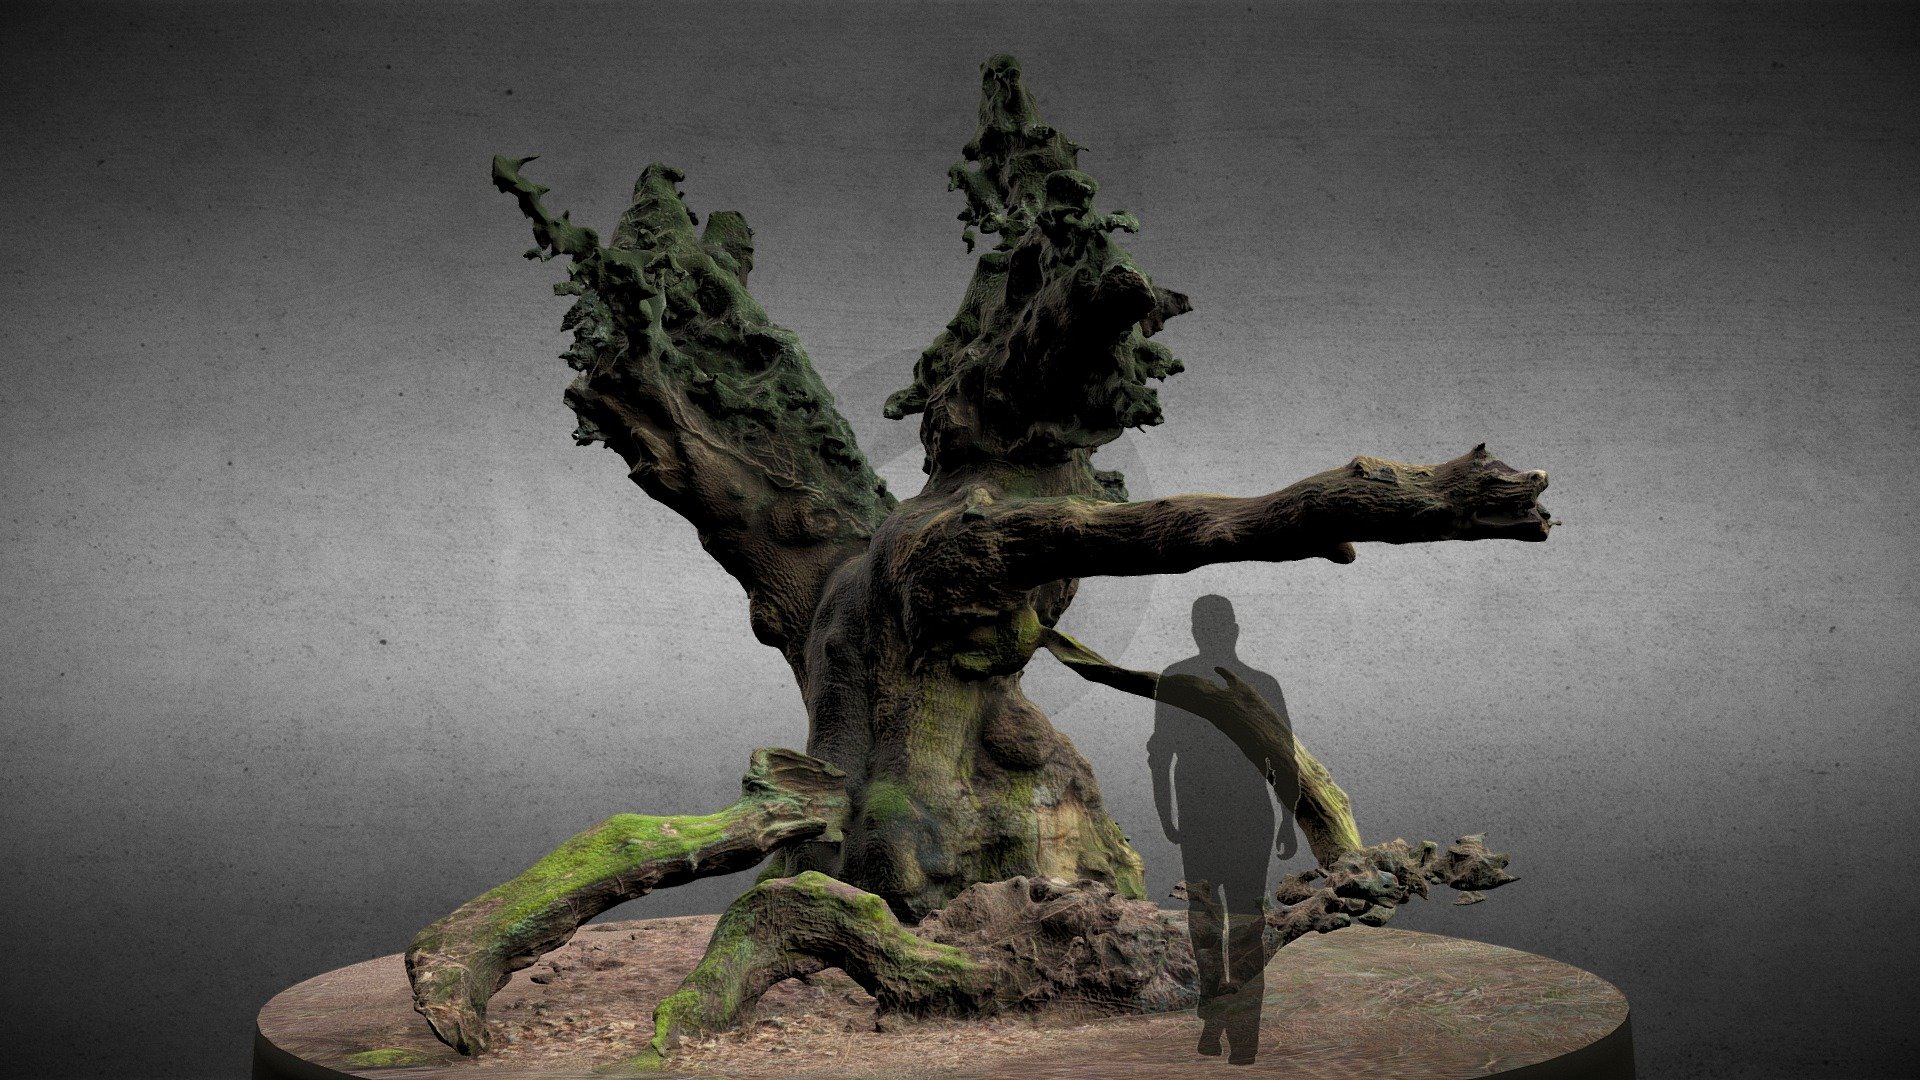 The Savernake Forest hides some of Britain's oldest and most bizarre oak trees. 
The trunk of this huge oak was overgrown by an ivy leaving only a few branches remain alive.

wikipedia


https://history.wiltshire.gov.uk/gallery/map/savernake_map004.jpg

silhouettes: http://www.freepik.com - Old Oak with Ivy - Savernake forest - 3D model by Mario_Wallner 3d model